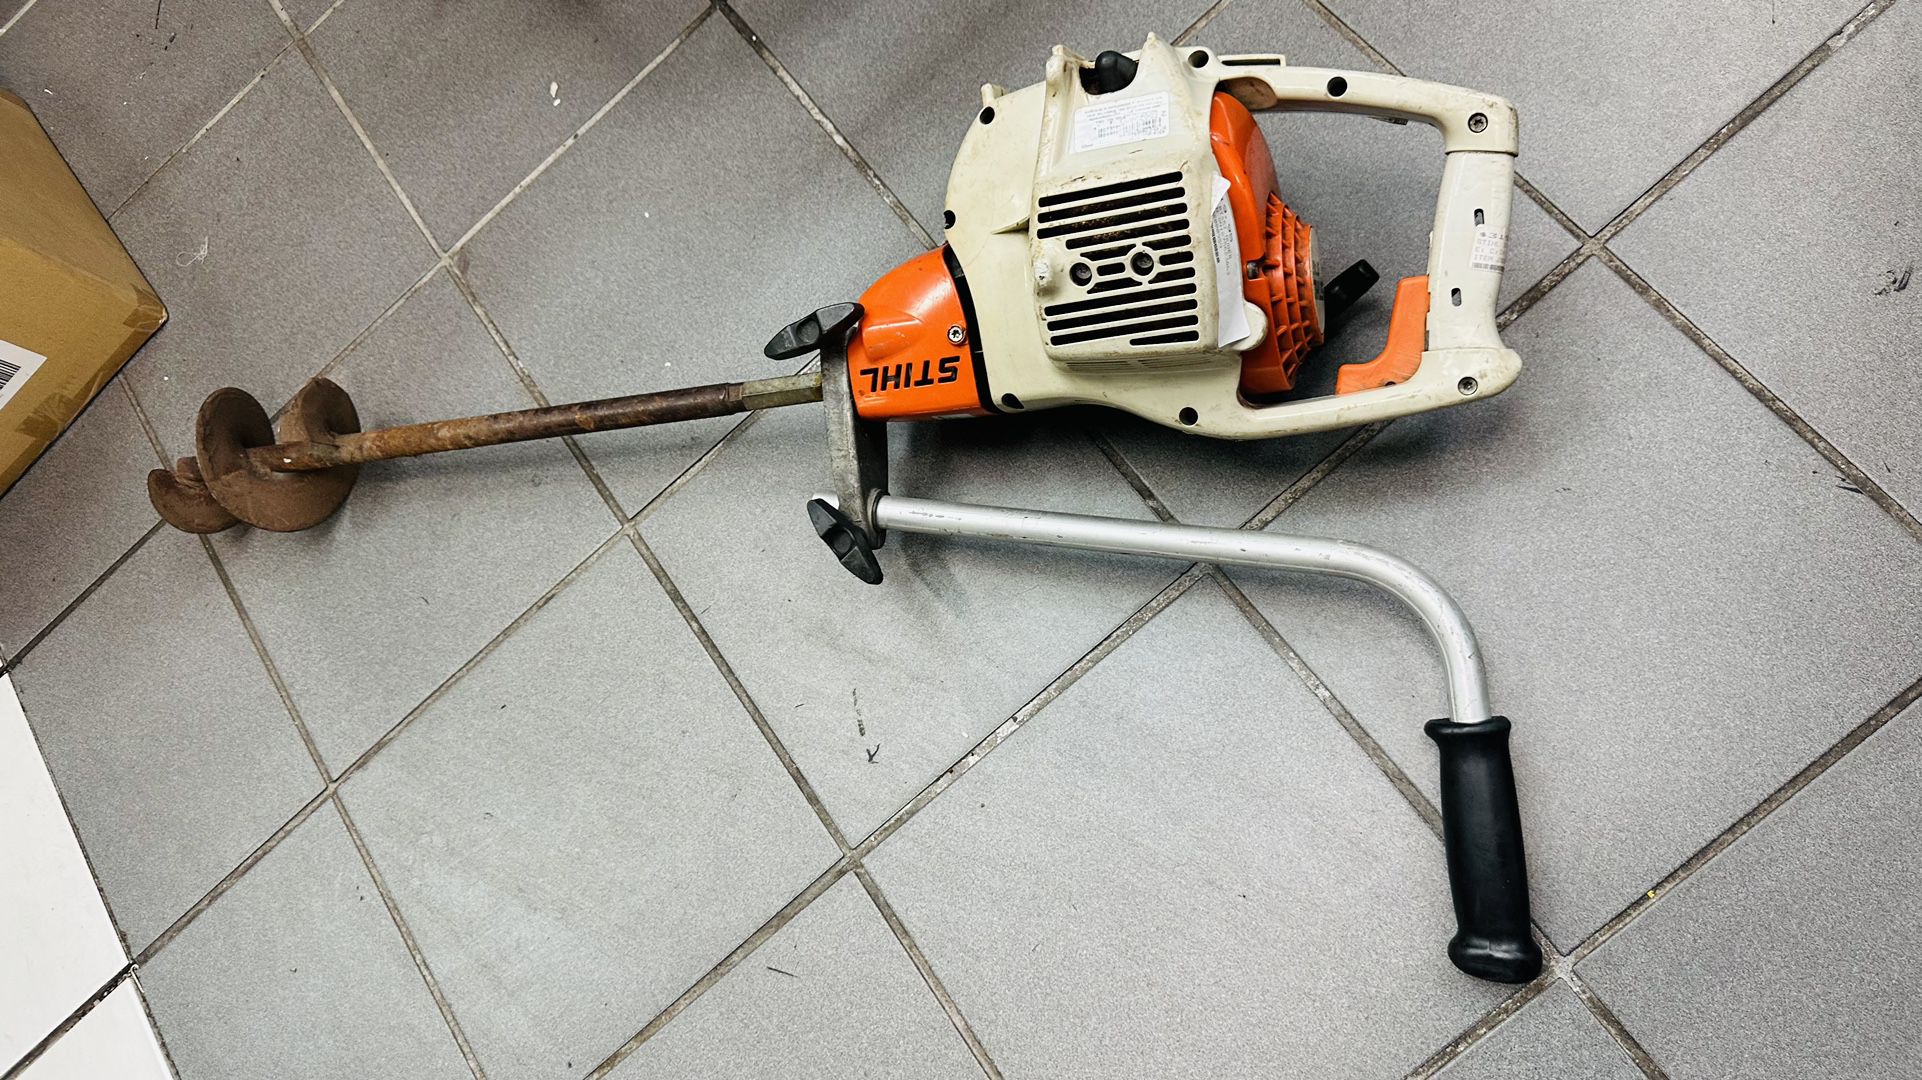 Stihl BT45 Wood Boring Drill Earth Auger Professional gas powered